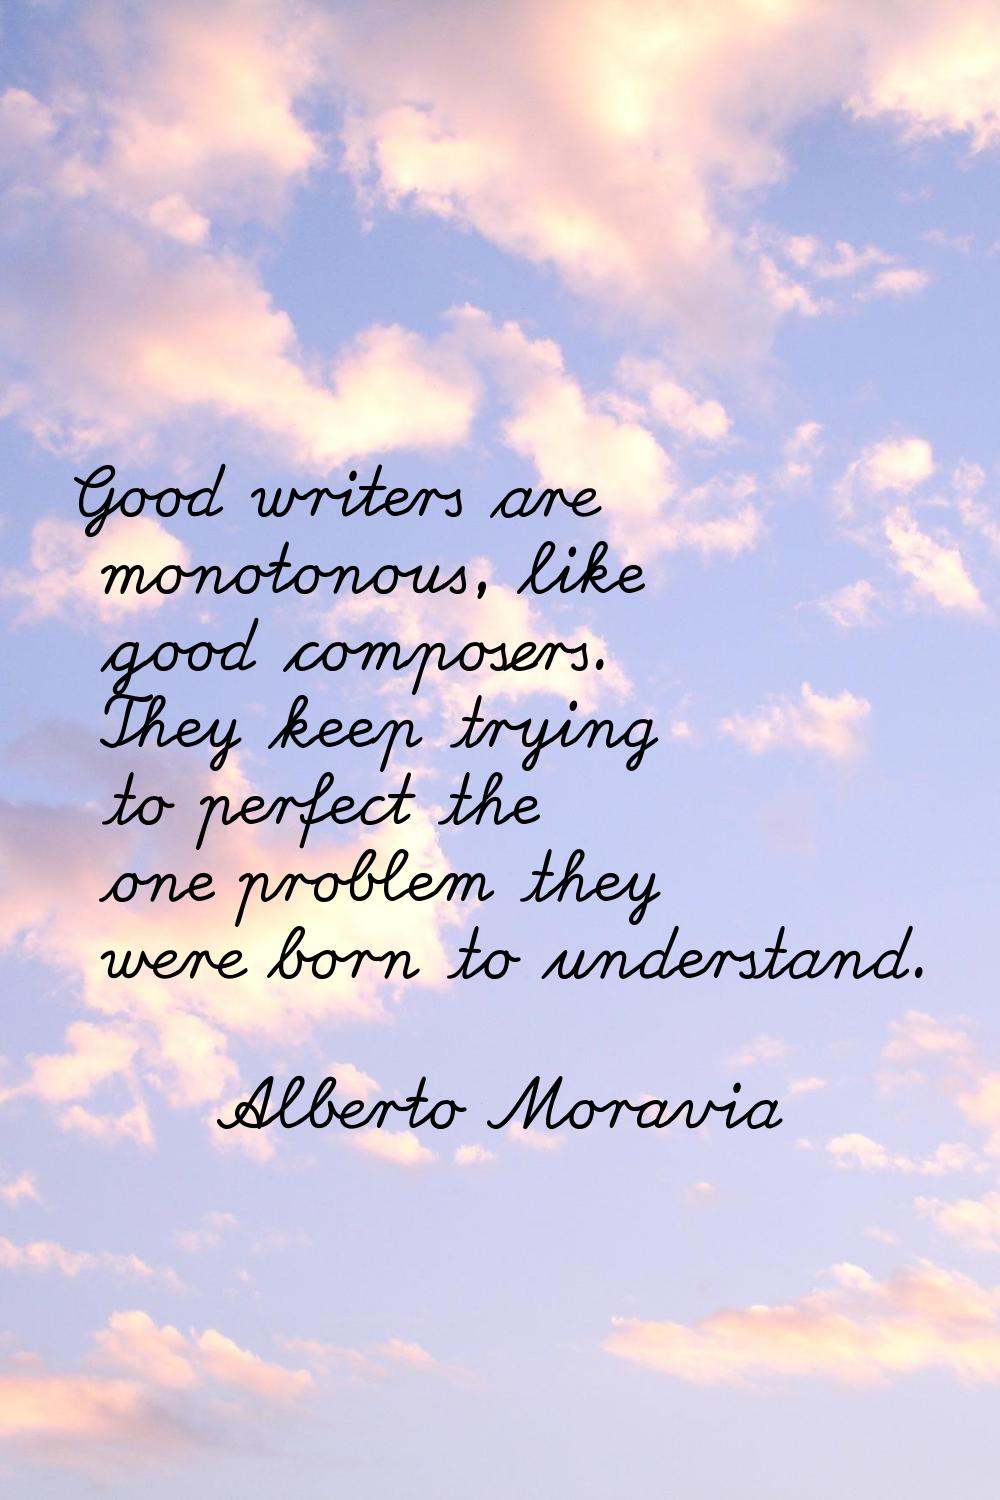 Good writers are monotonous, like good composers. They keep trying to perfect the one problem they 